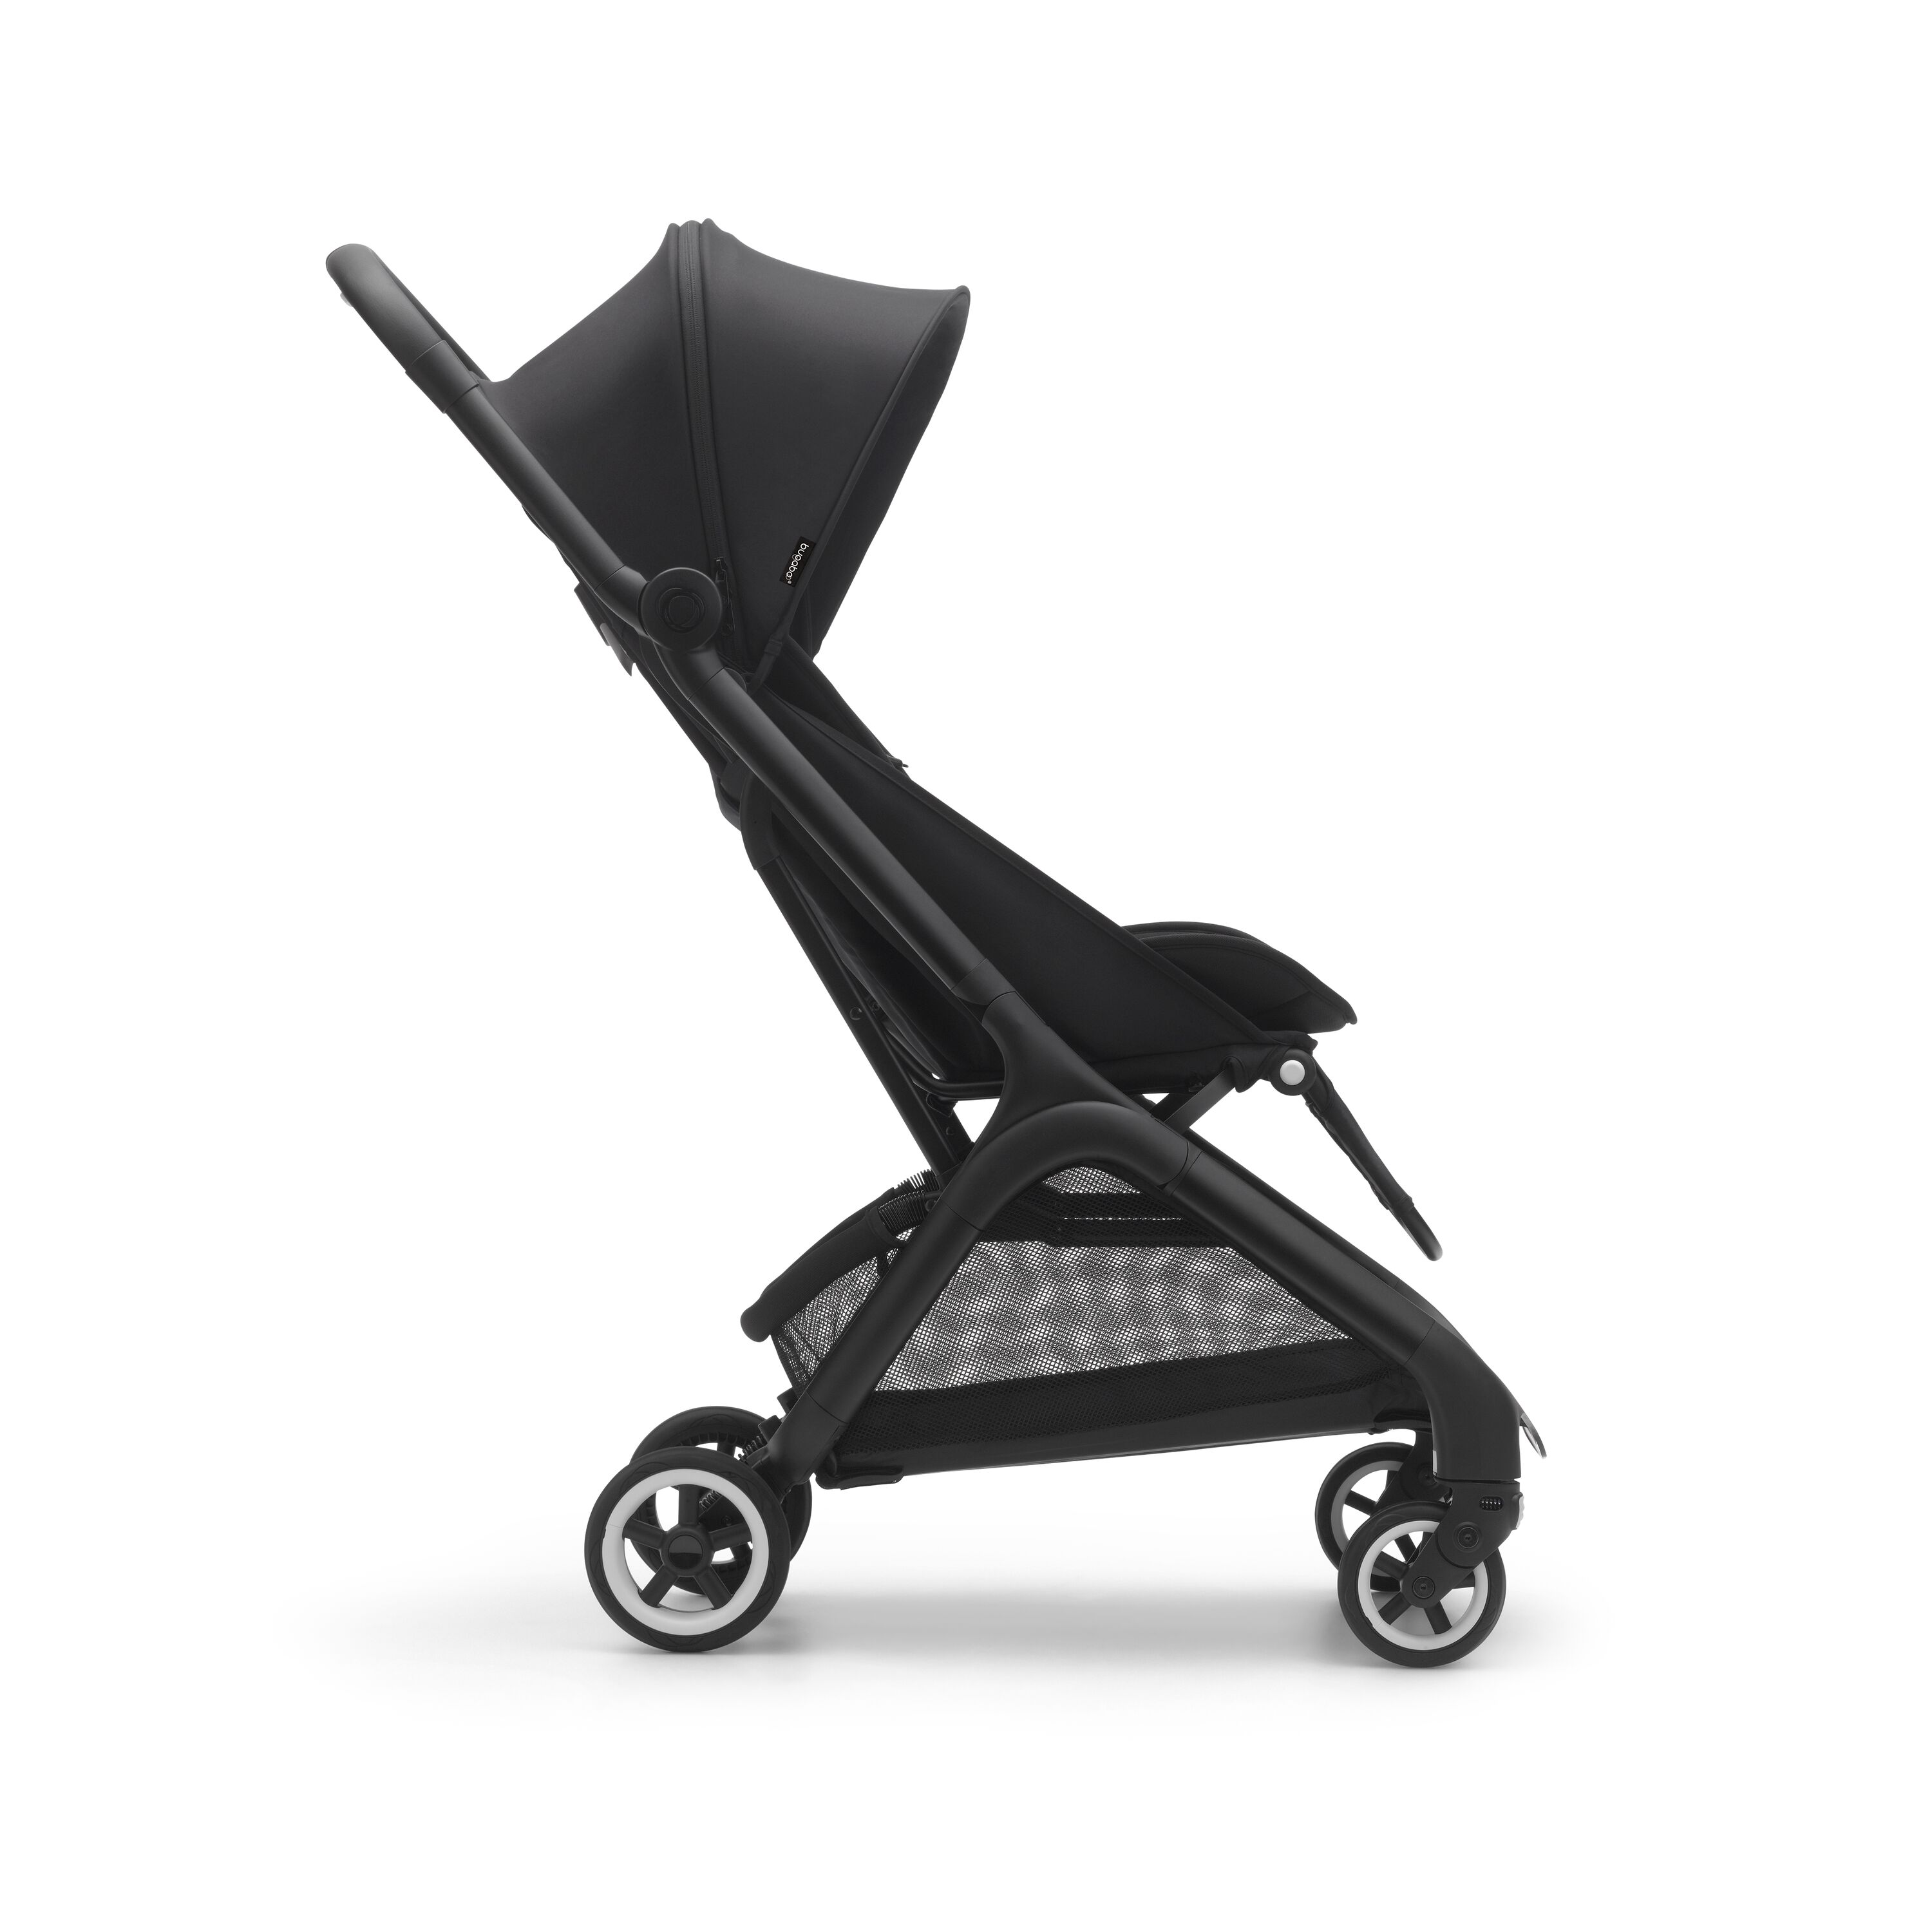 Bugaboo Butterfly pushchair review - Lightweight buggies & strollers -  Pushchairs